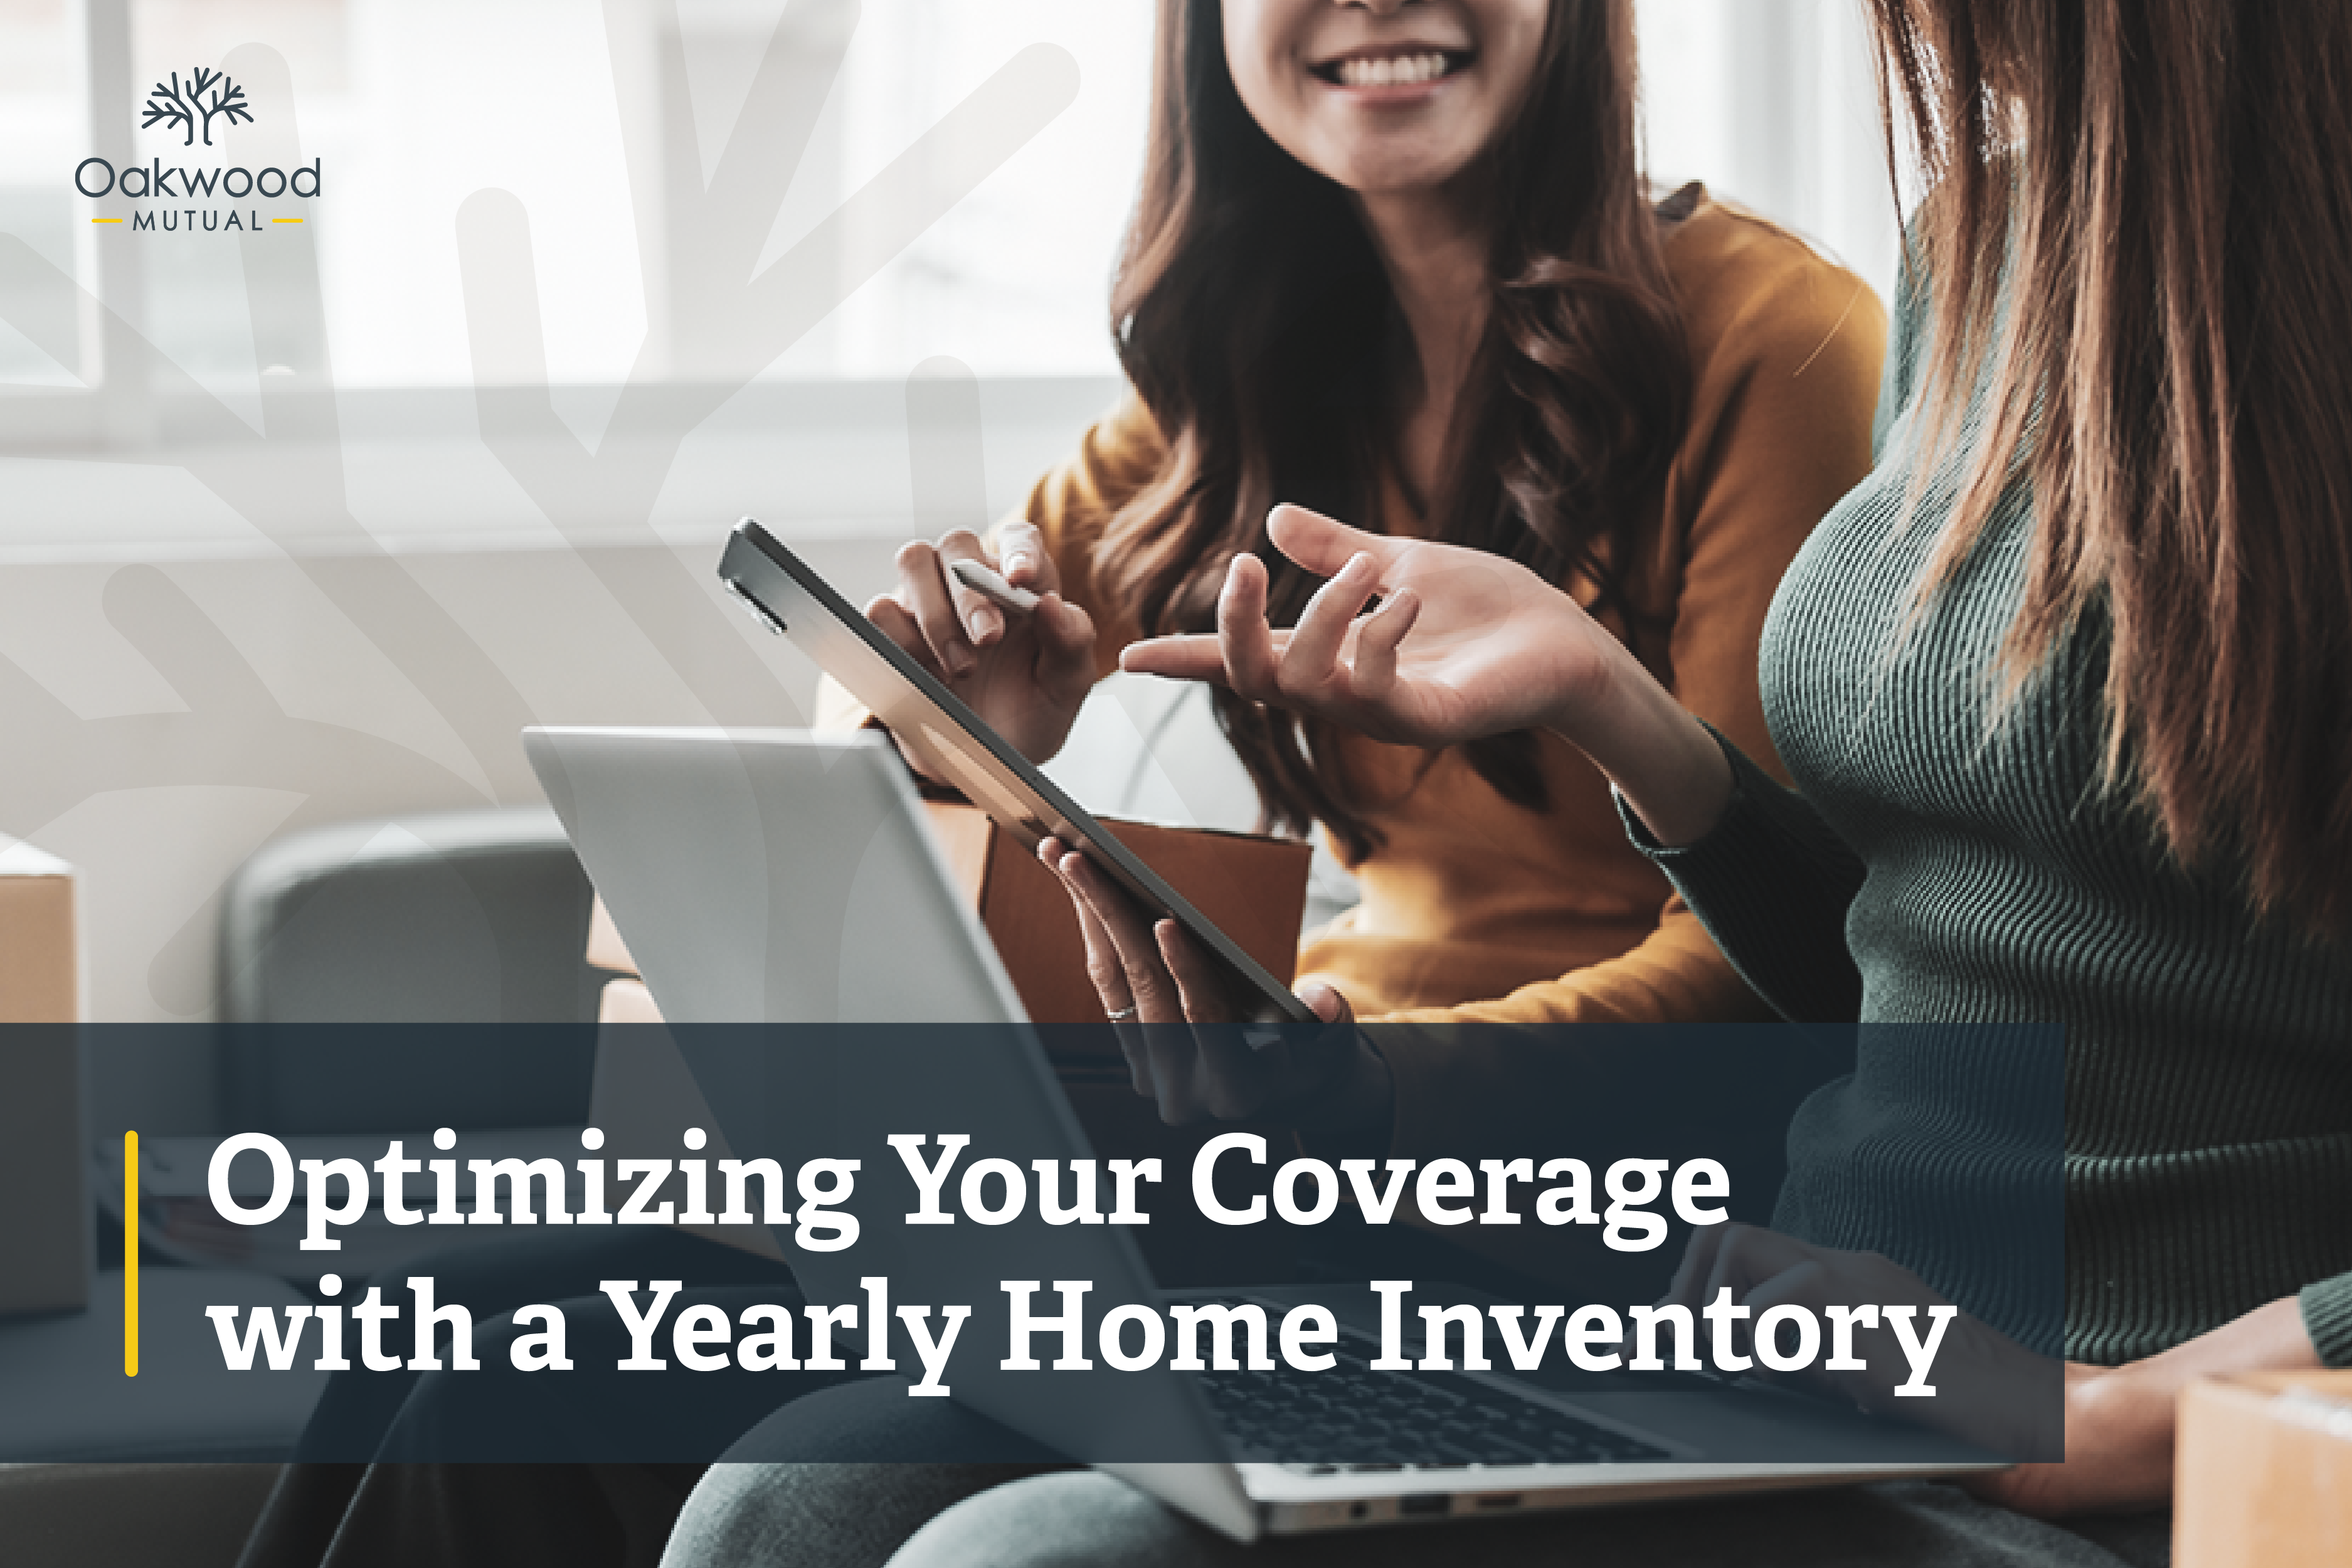 7201D_Optimizing Your Coverage with a Yearly Home Inventory-2